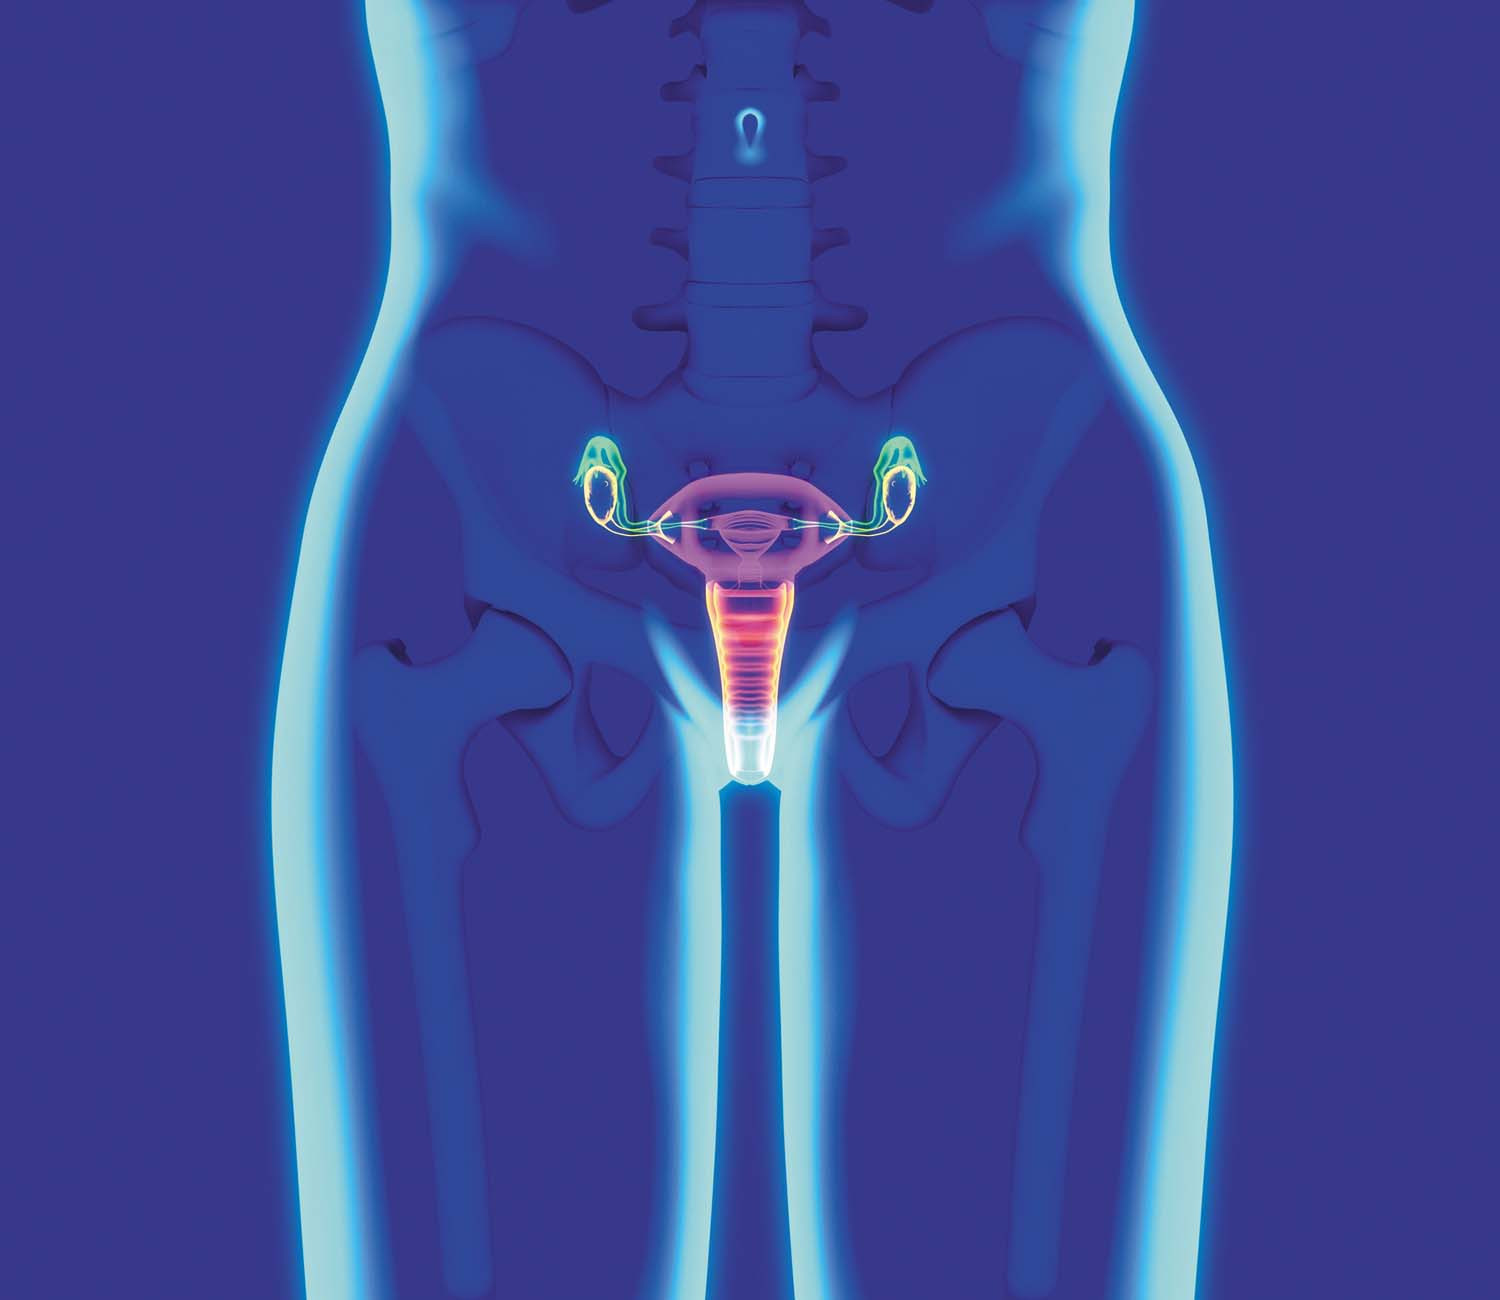 translucent illustration of a female body highlighting the reproductive organs